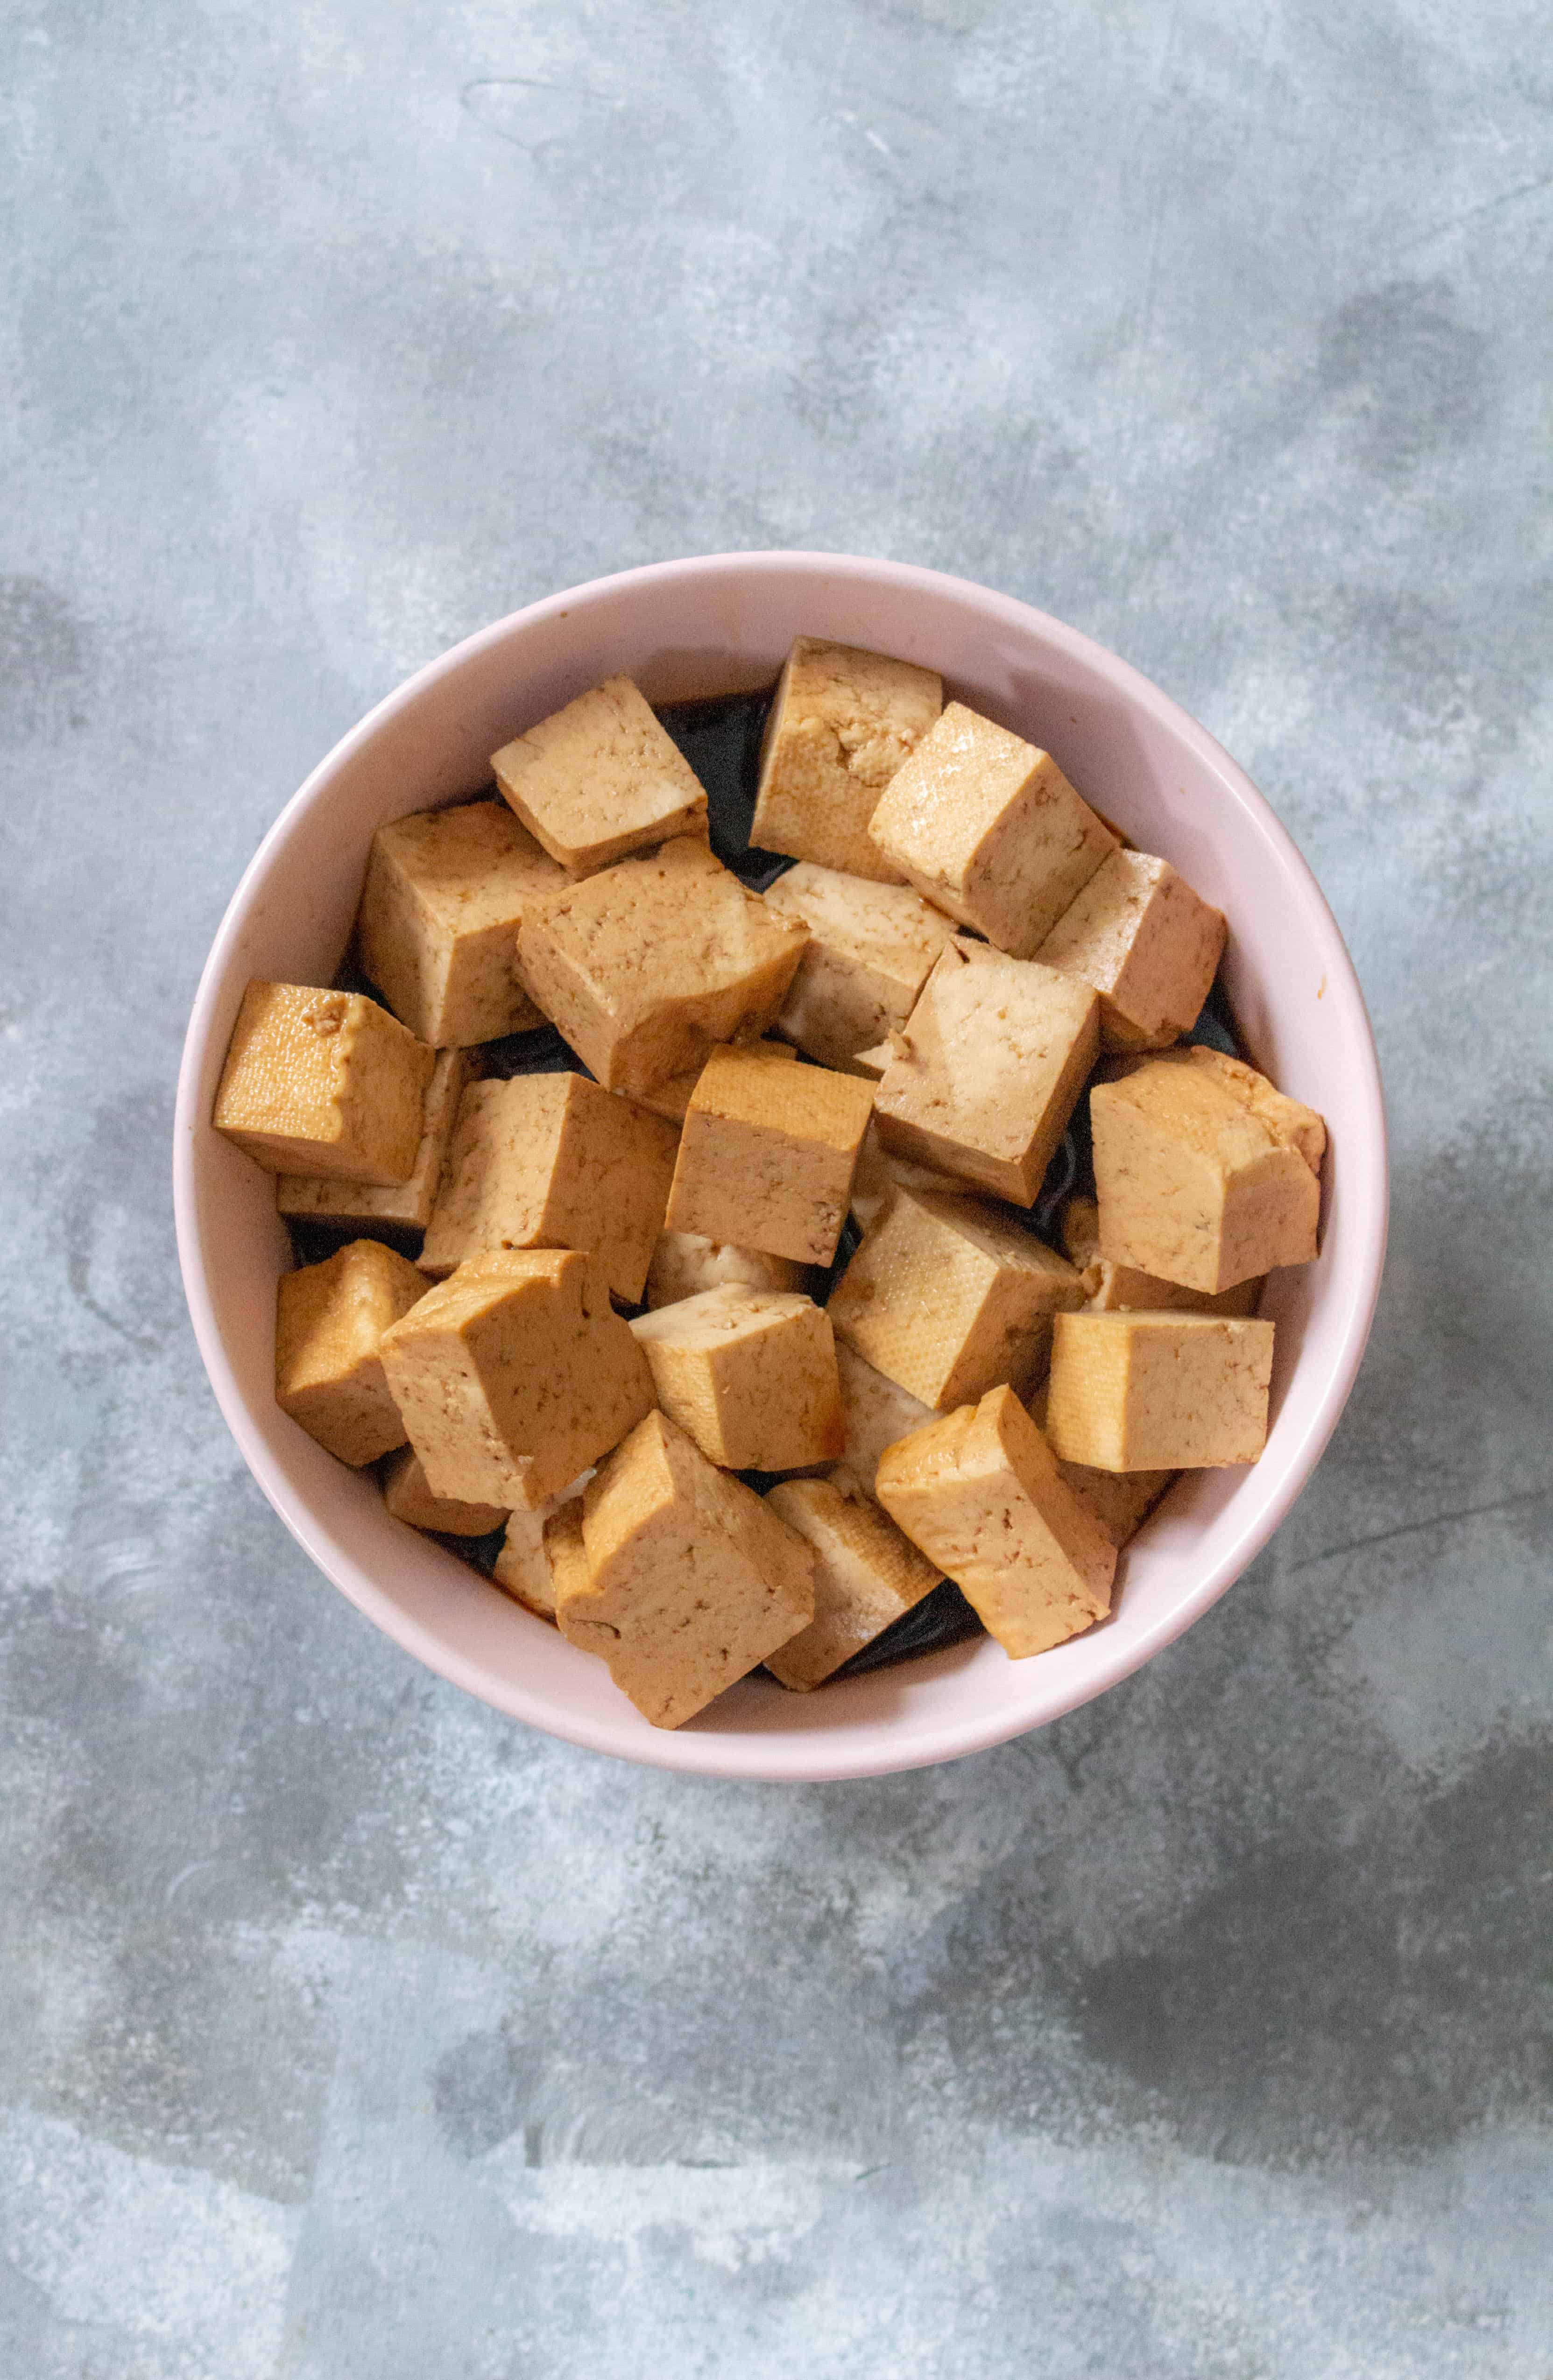 crispy tofu at home with an air fryer